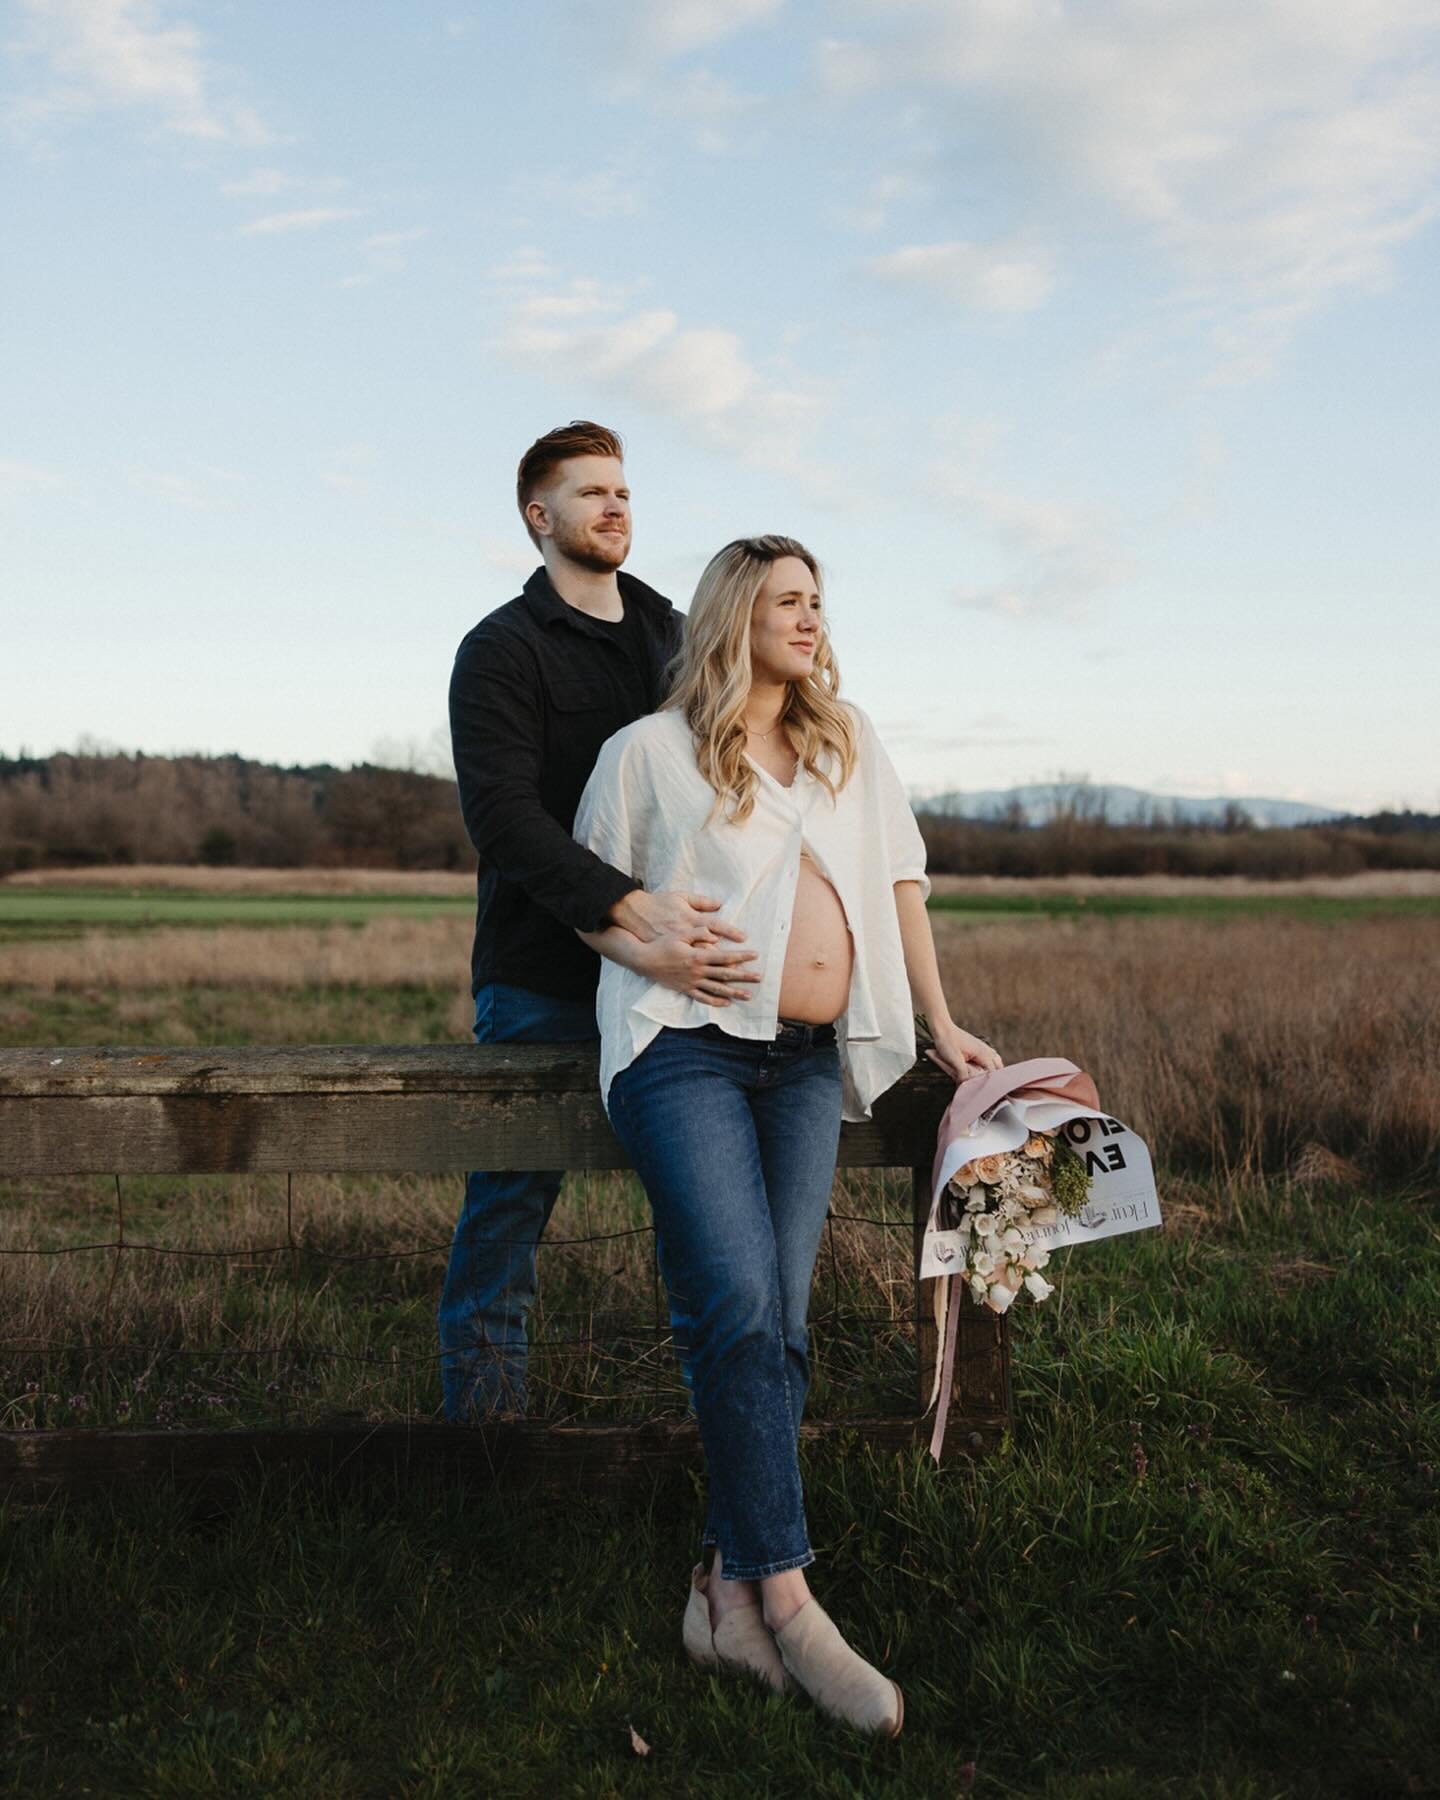 Couldn&rsquo;t resist sharing more of these sweet springtime moments! It&rsquo;s your sign to always, ALWAYS say yes to maternity photos! 💐